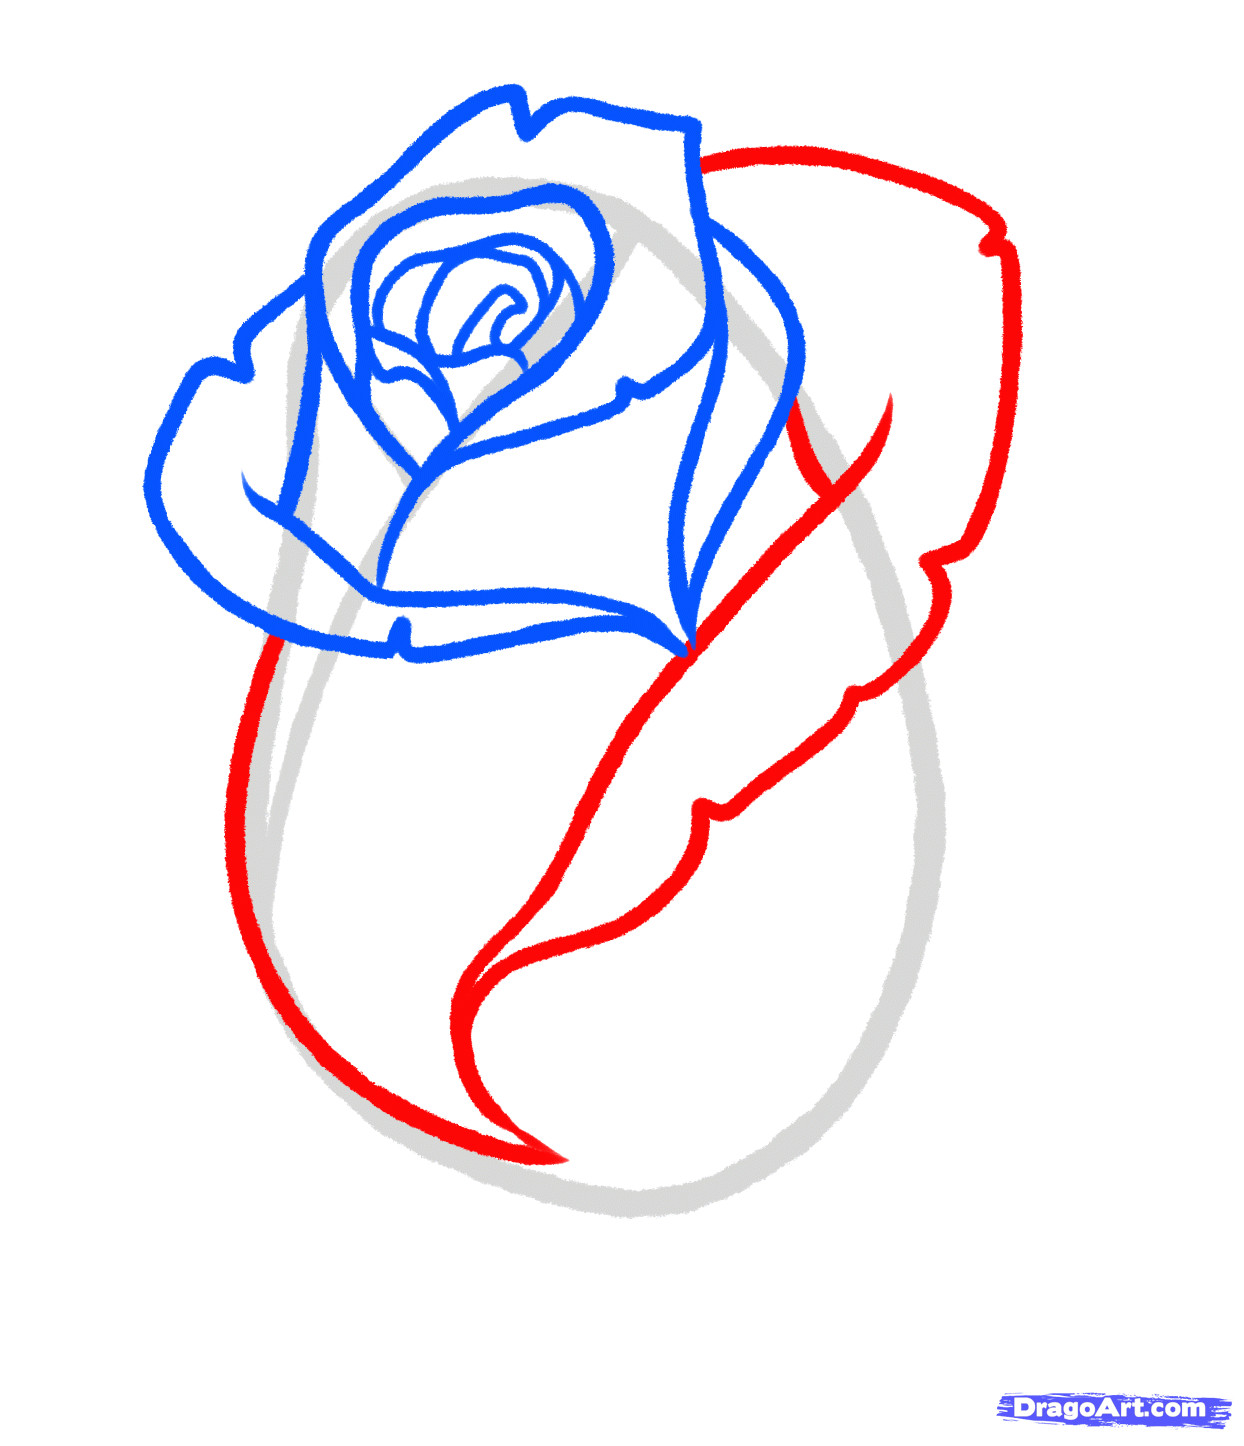 Draw A Blue Rose How to Draw A Rose Bud Rose Bud Step 5 Sketching Flowers